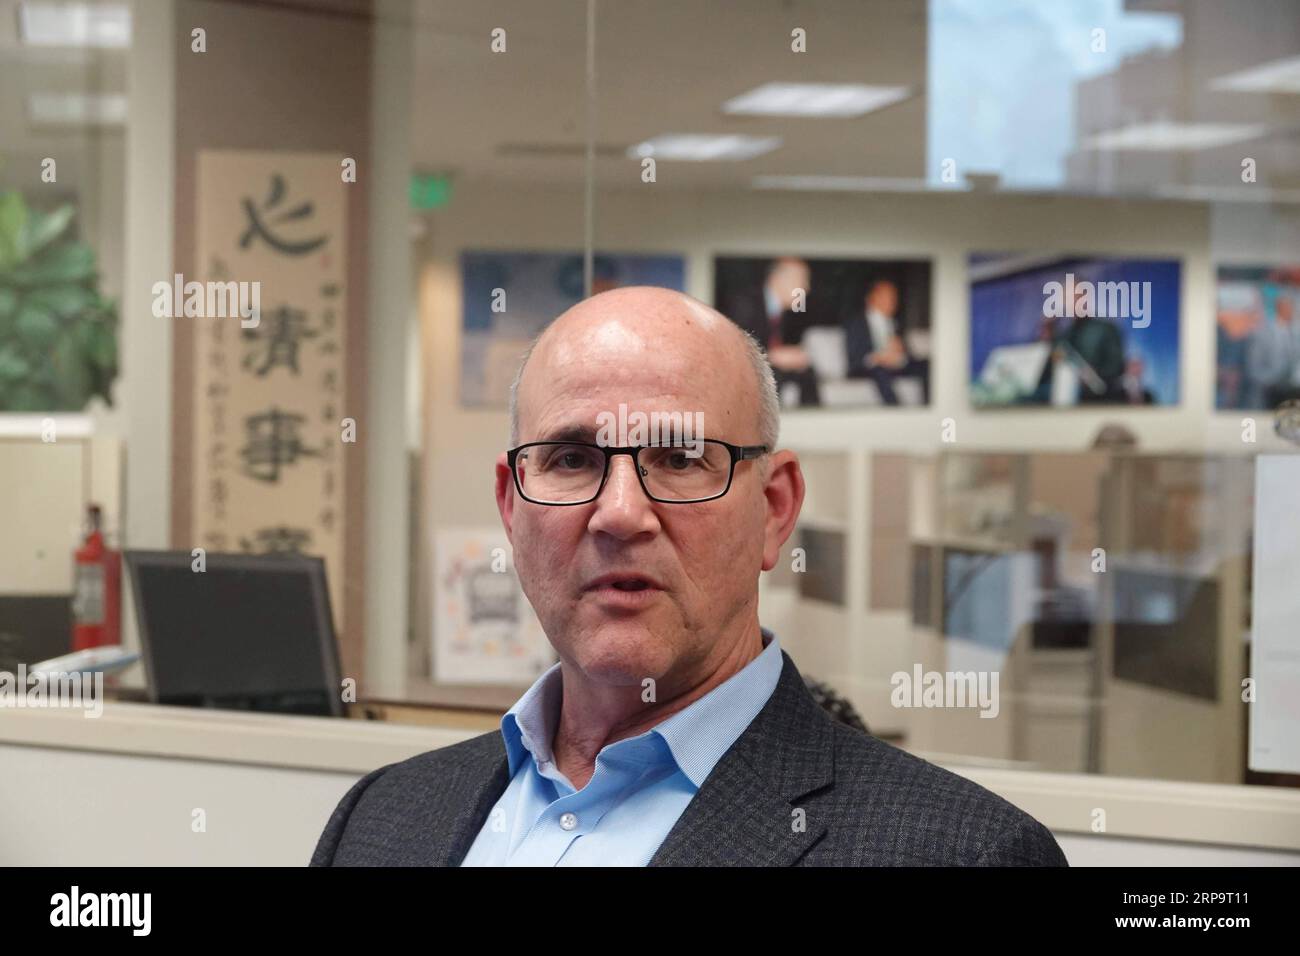 (190416) -- SAN FRANCISCO, April 16, 2019 (Xinhua) -- Jim Wunderman, president and CEO of the Bay Area Council (BAC), receives an interview with Xinhua in San Francisco, the United States, on March 27, 2019. (Xinhua/Wu Xiaoling) Xinhua Headlines: U.S. tech giants eastward expansion ramifies into social-economic structure, adding chances of cooperation with China PUBLICATIONxNOTxINxCHN Stock Photo